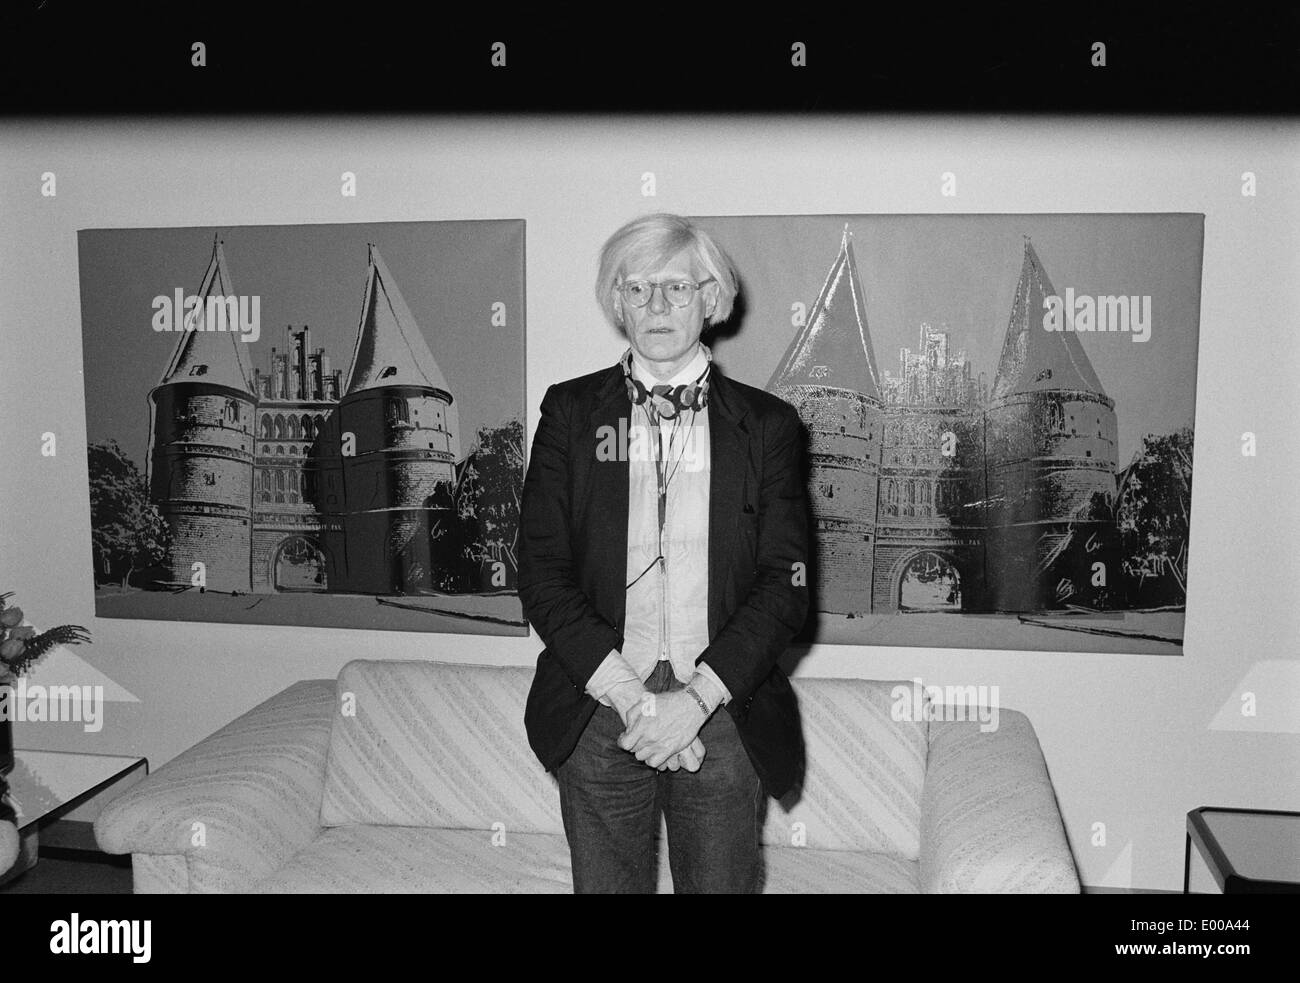 Andy Warhol in Luebeck Stock Photo